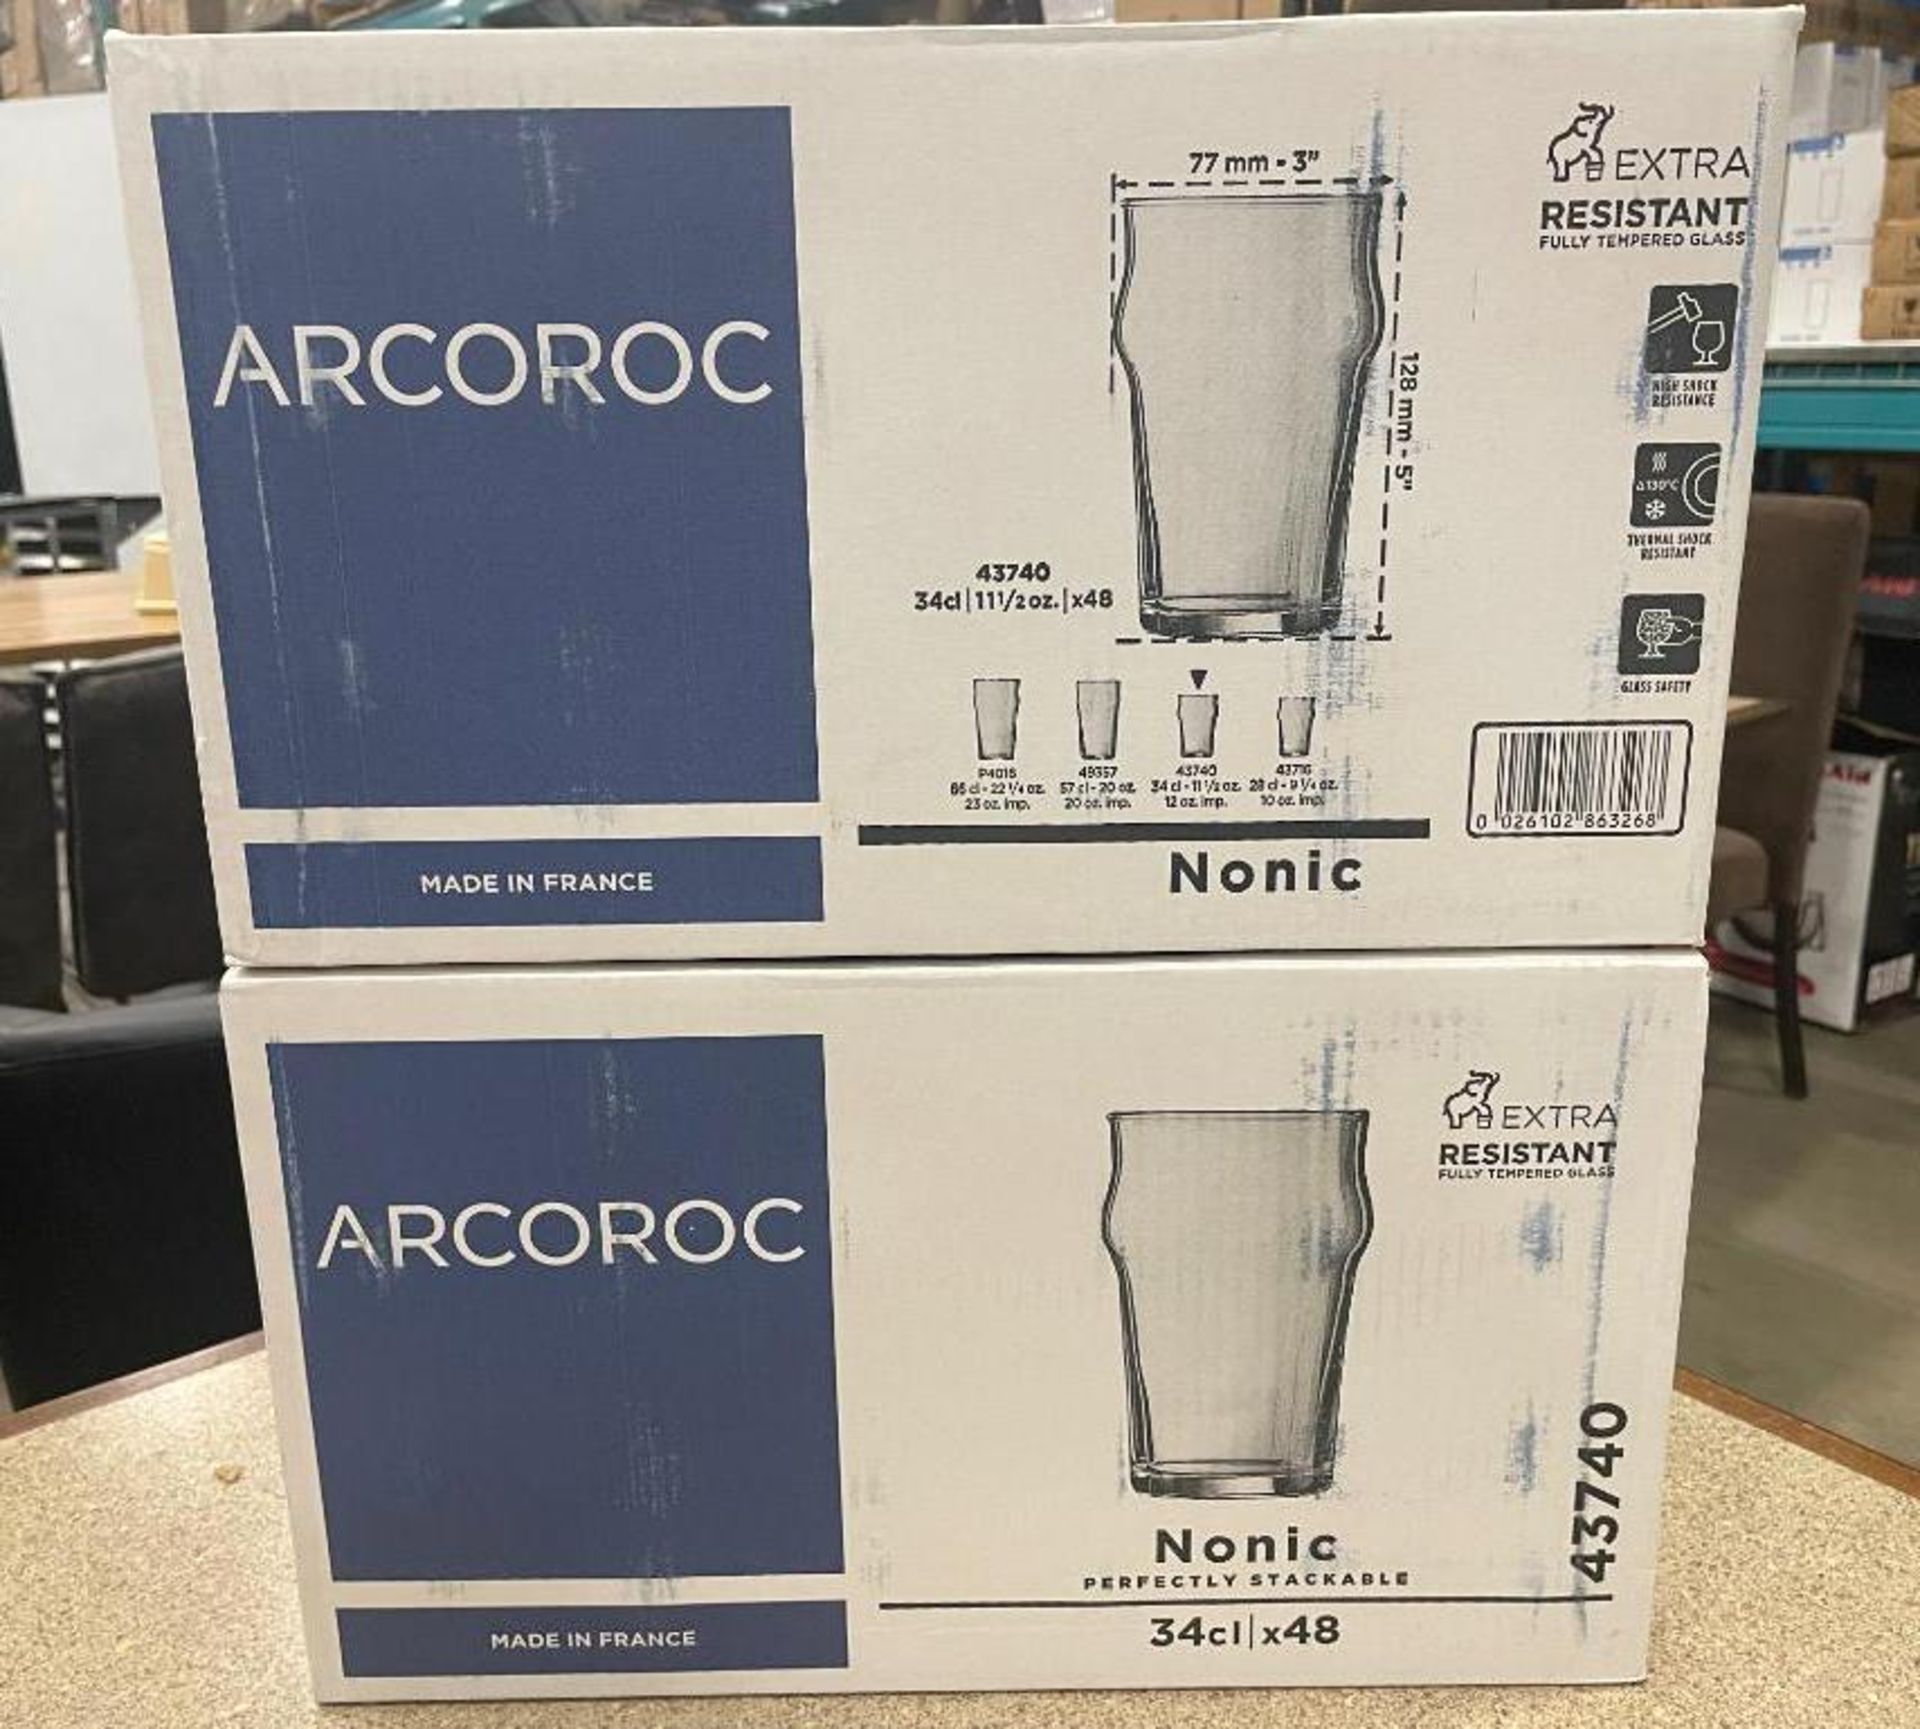 2 CASES OF 12OZ NONIC BEER GLASS, ARCOROC 43740 - 24 PER CASE - Image 2 of 14